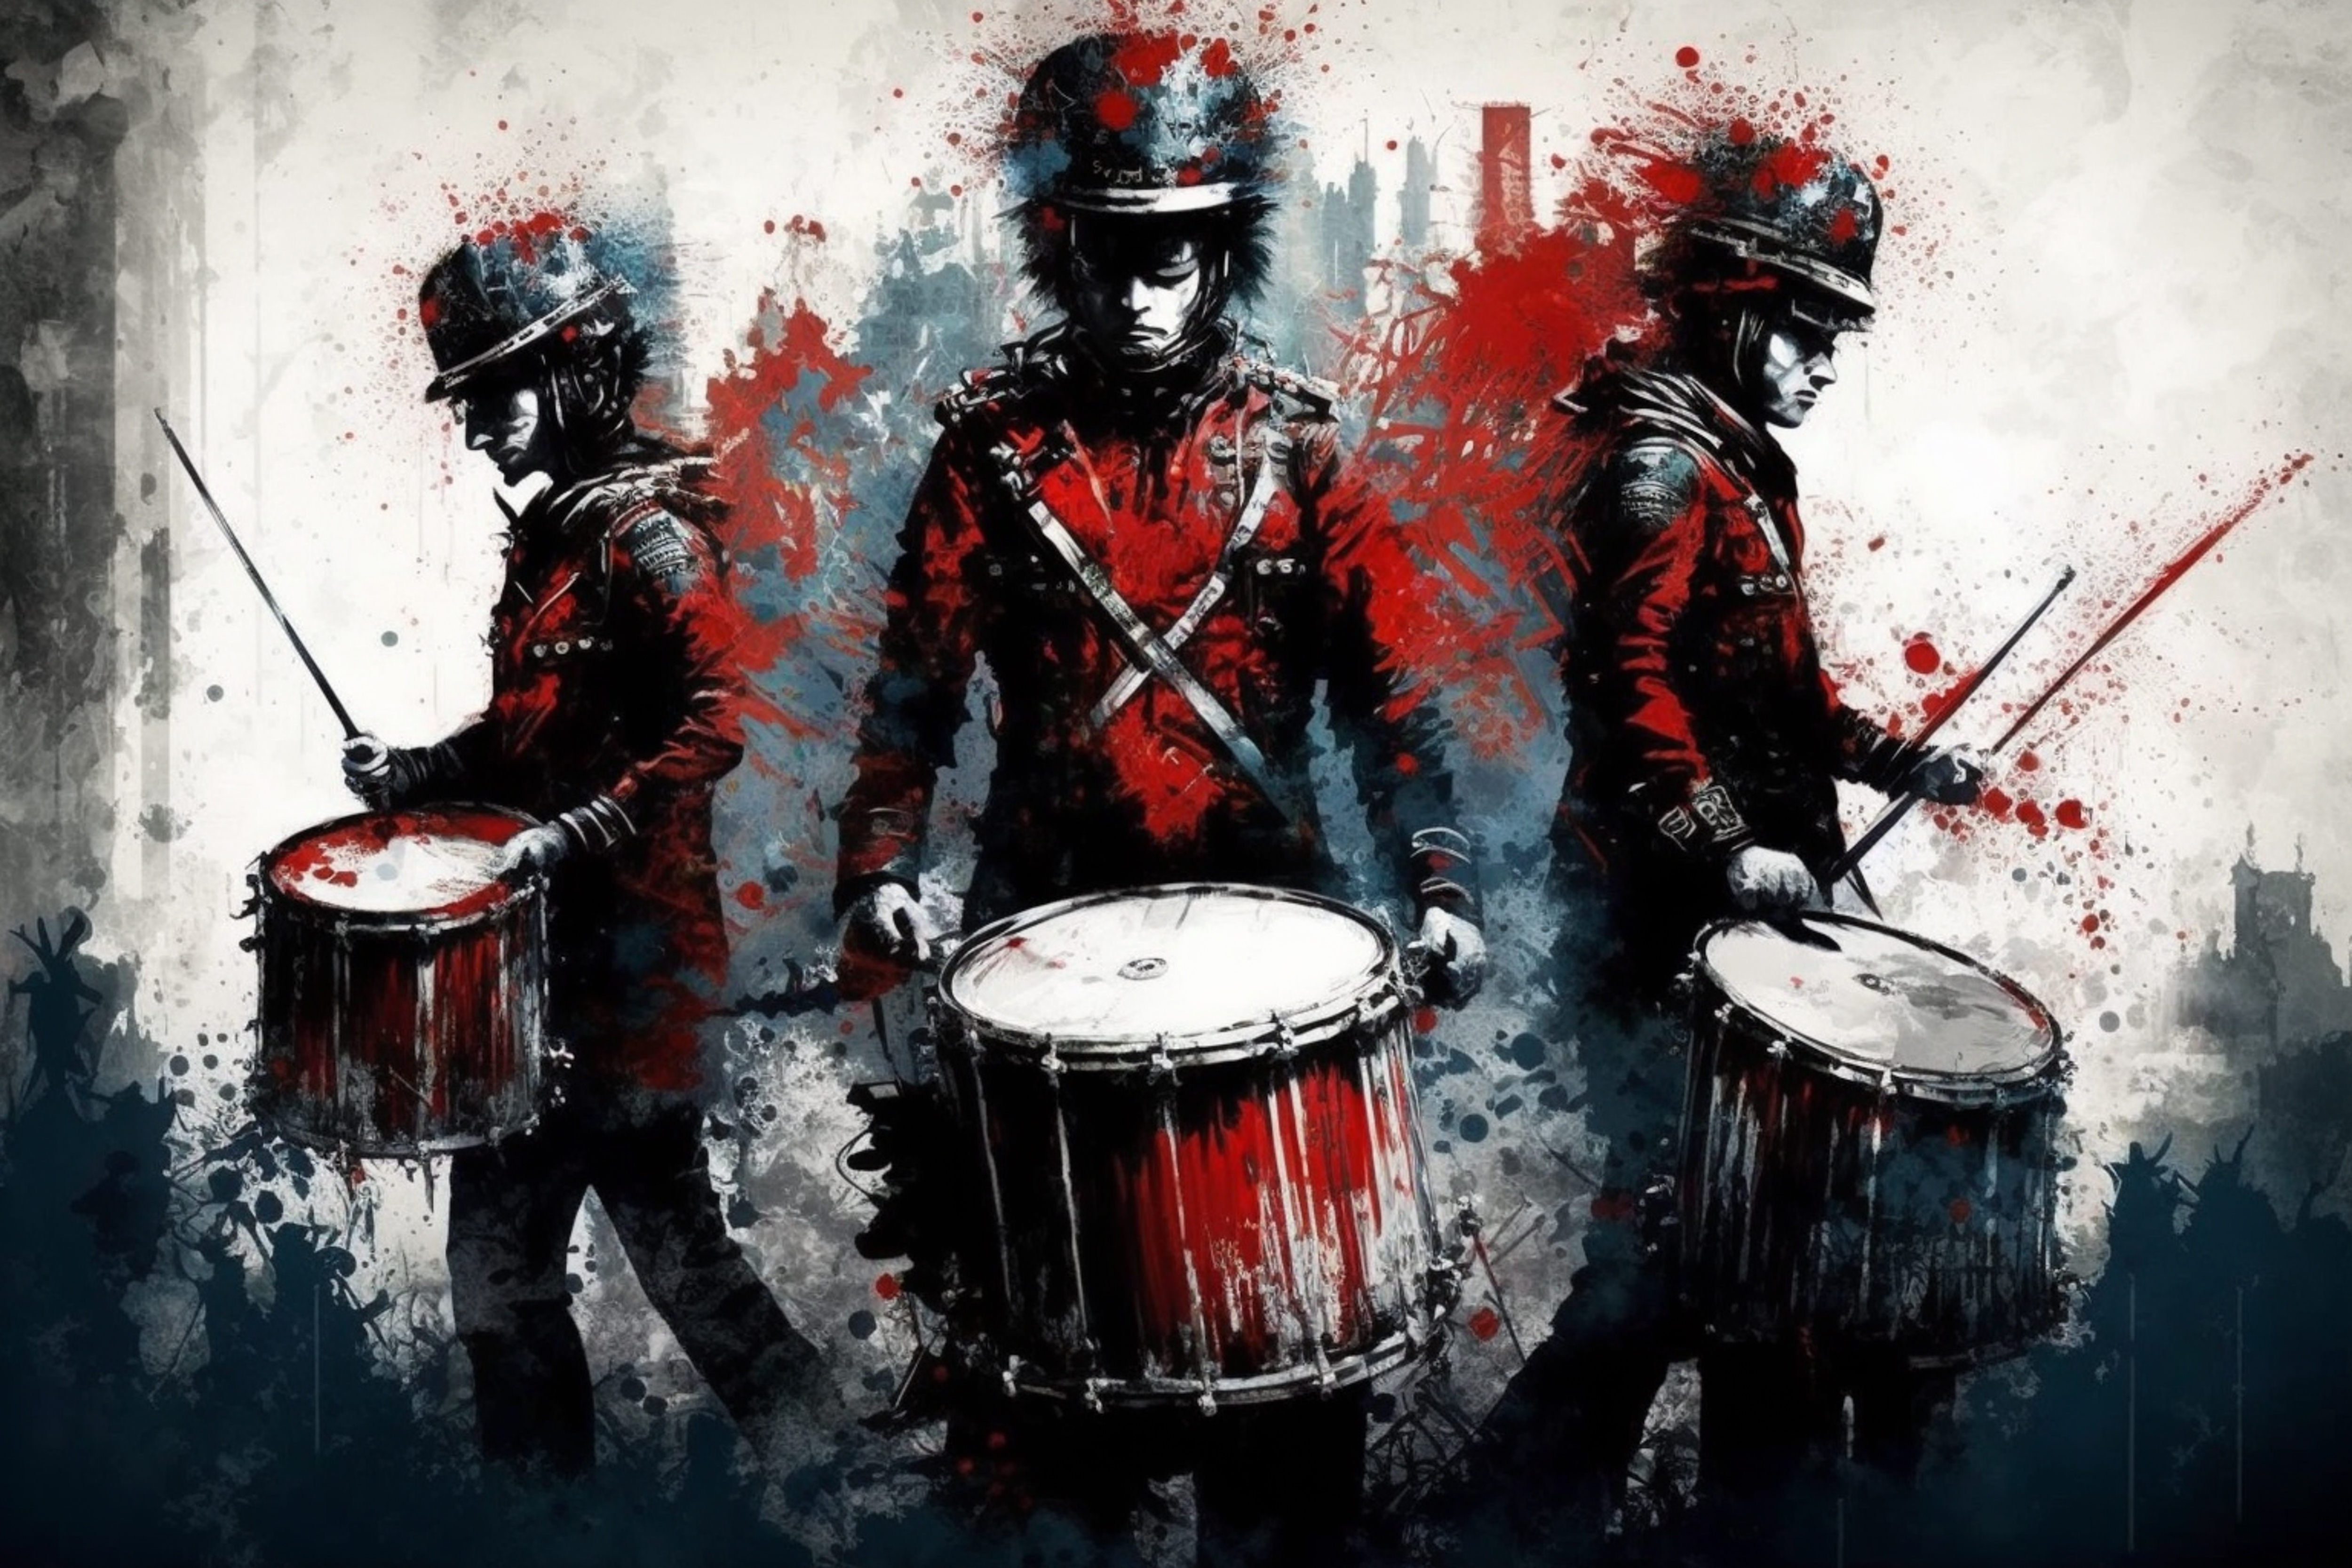 band-playing-dark-background-with-blood-splatters.jpg